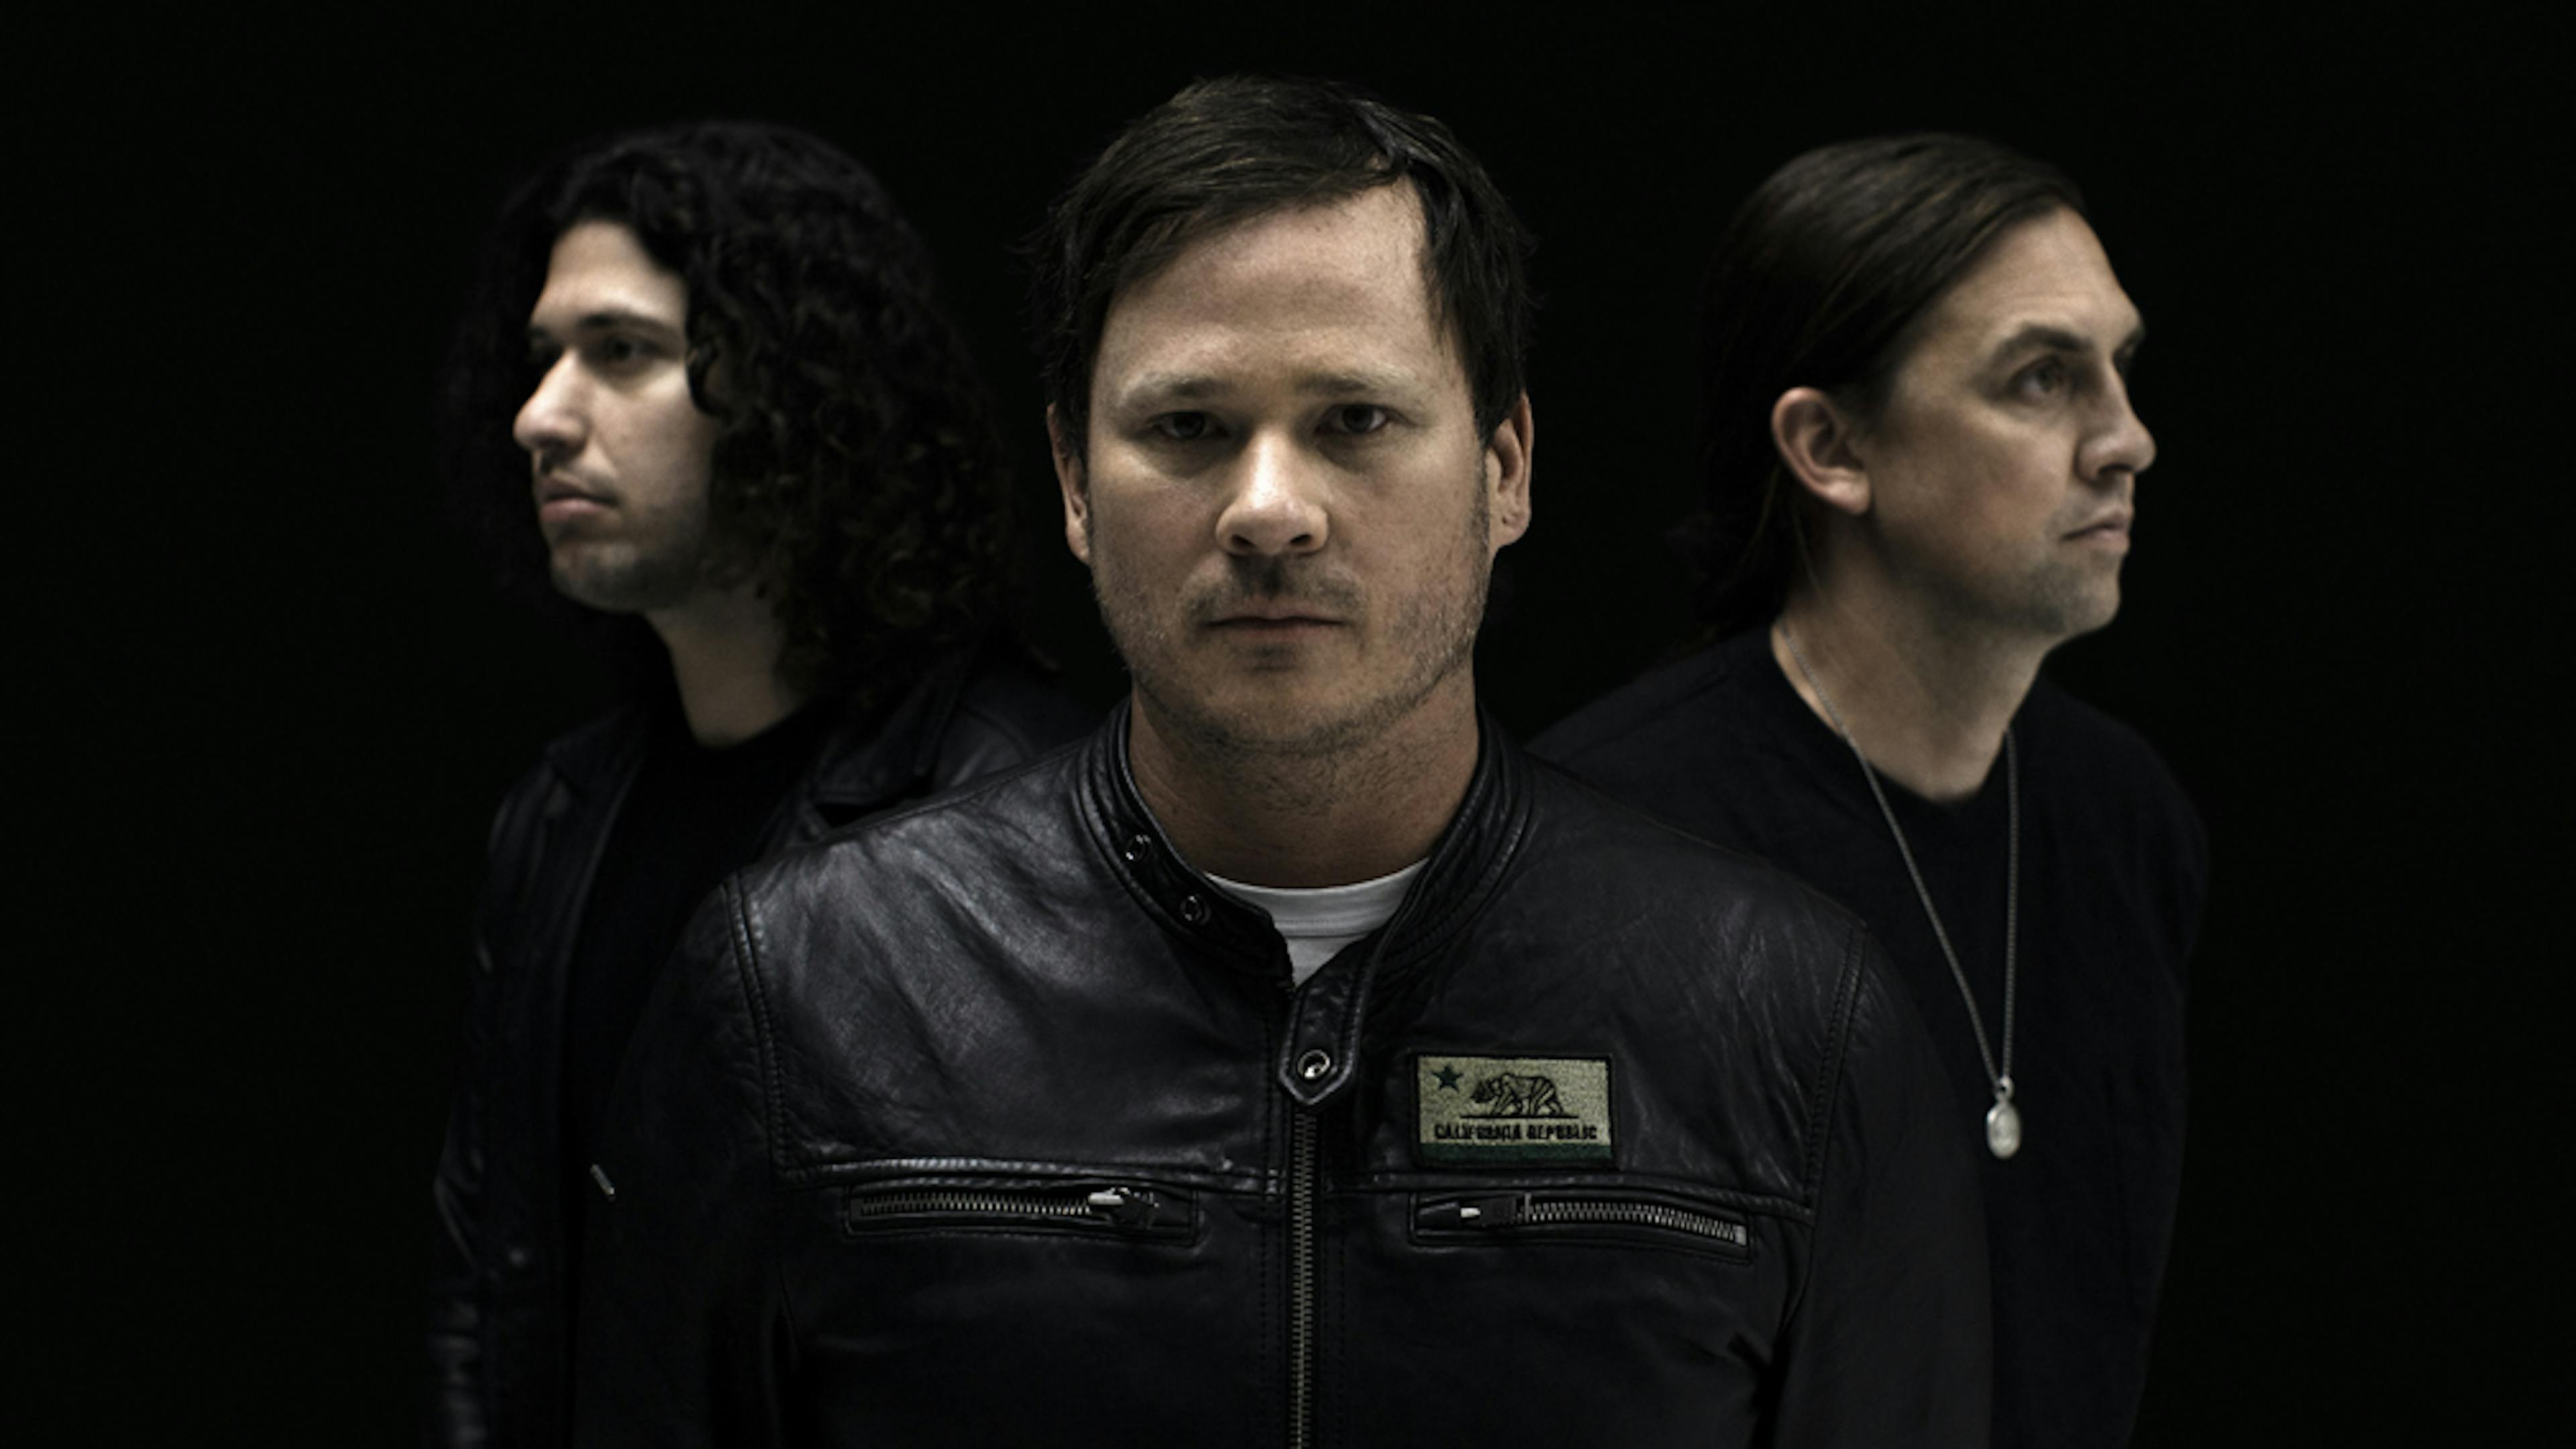 Tom DeLonge: "Every Artist Is Insecure About What They're Creating"